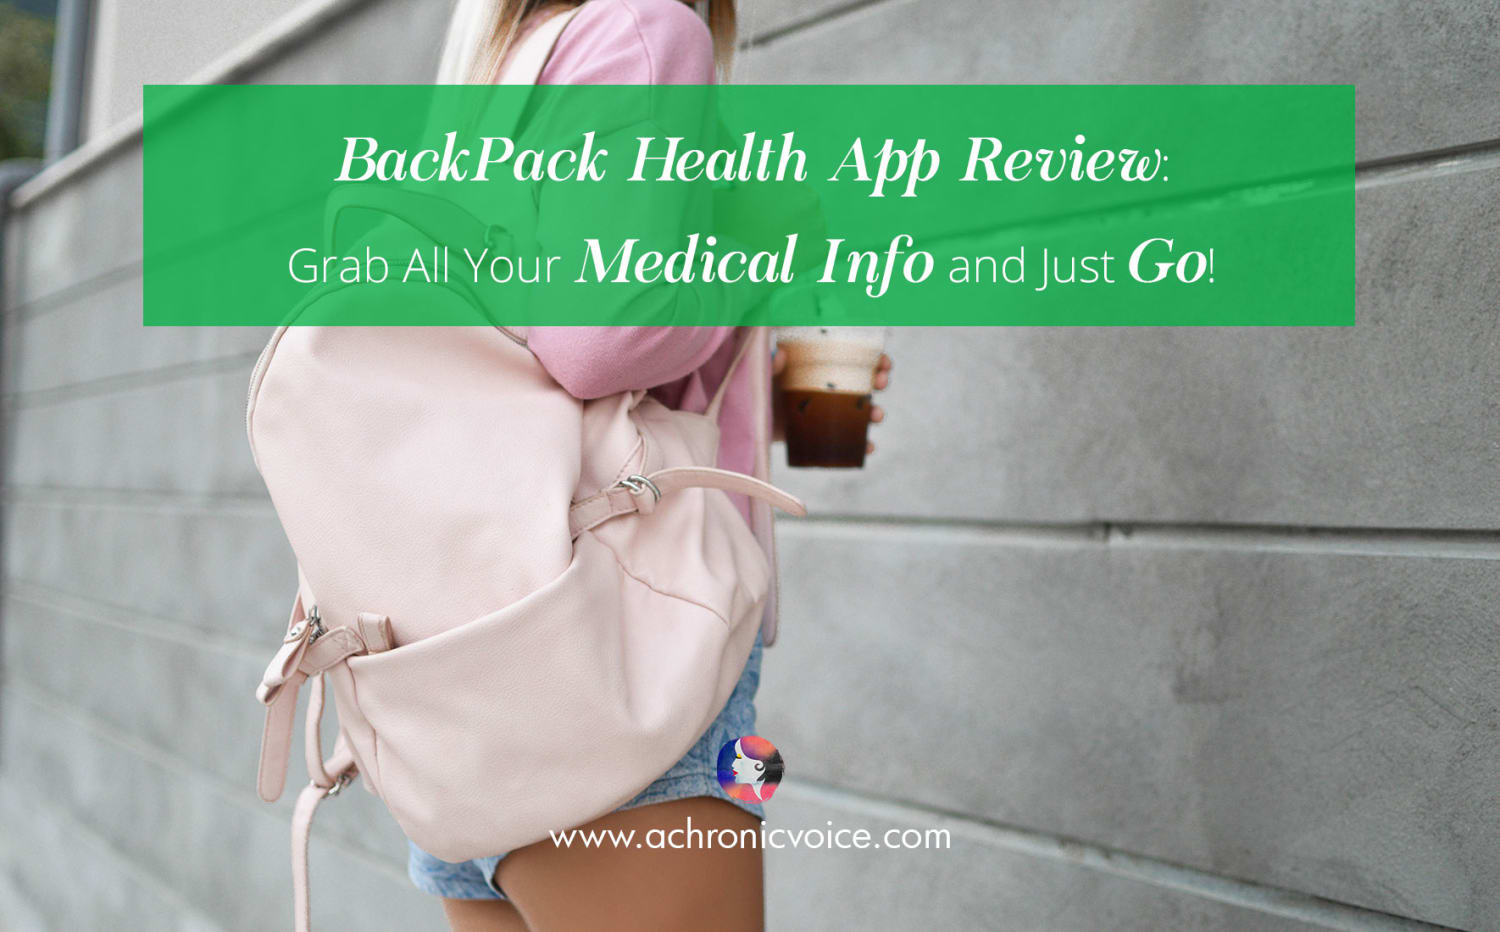 BackPack Health App Review: Grab All Your Medical Info and Just Go!